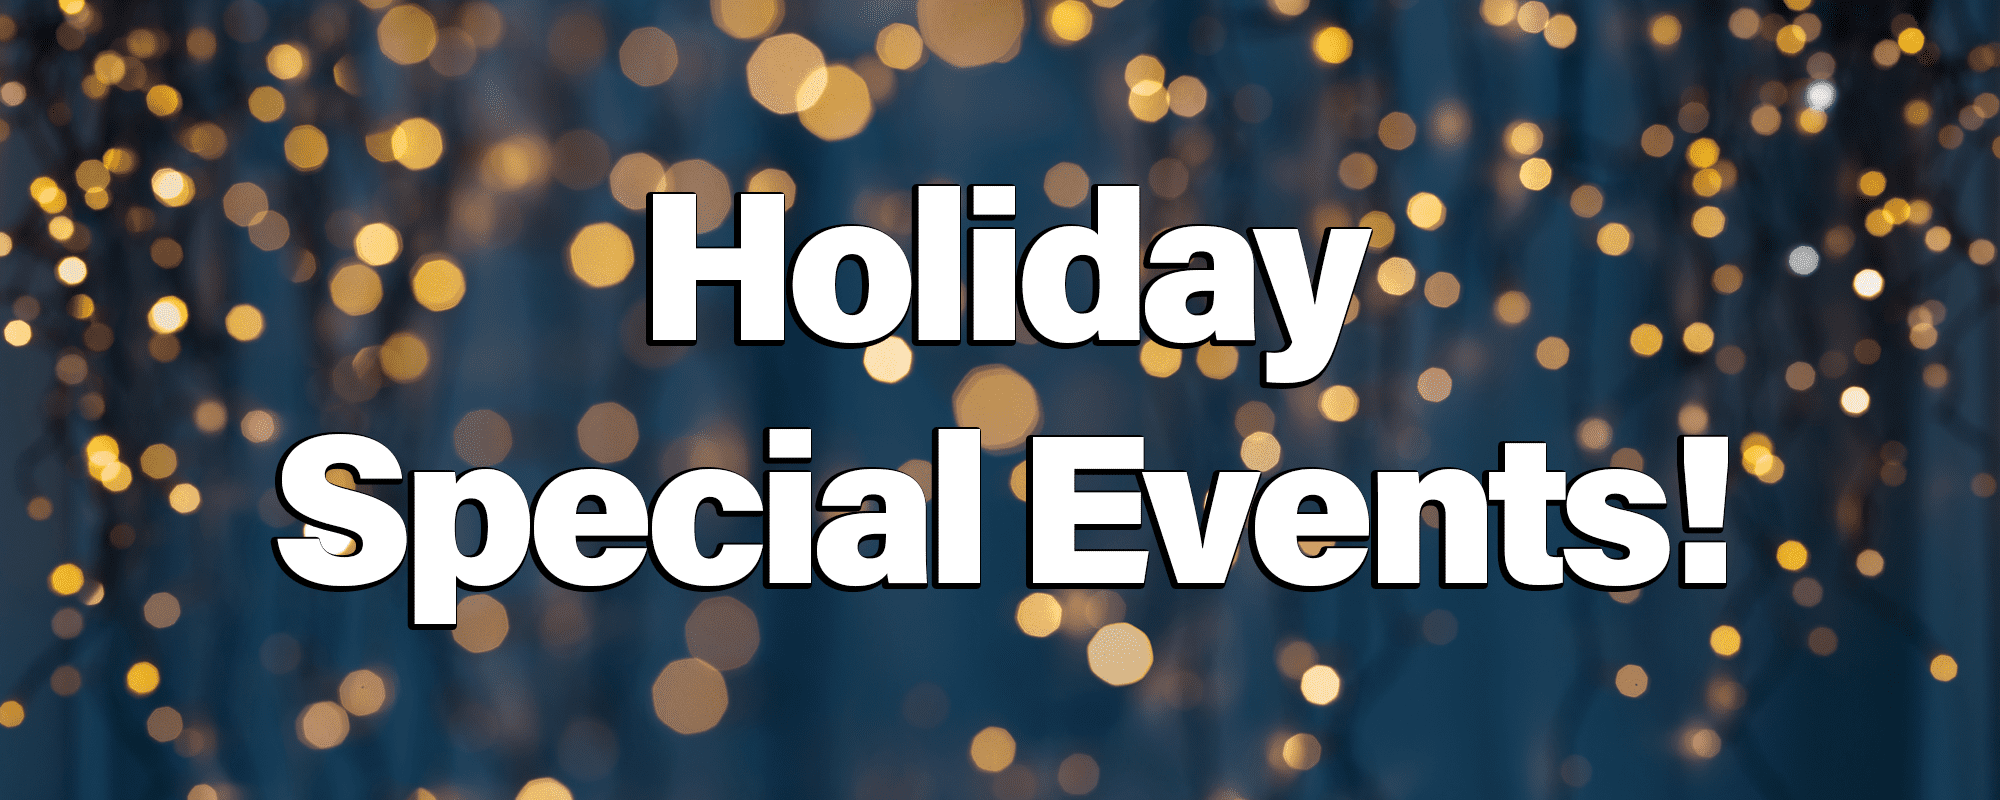 Featured image for “Holiday Special Events!”